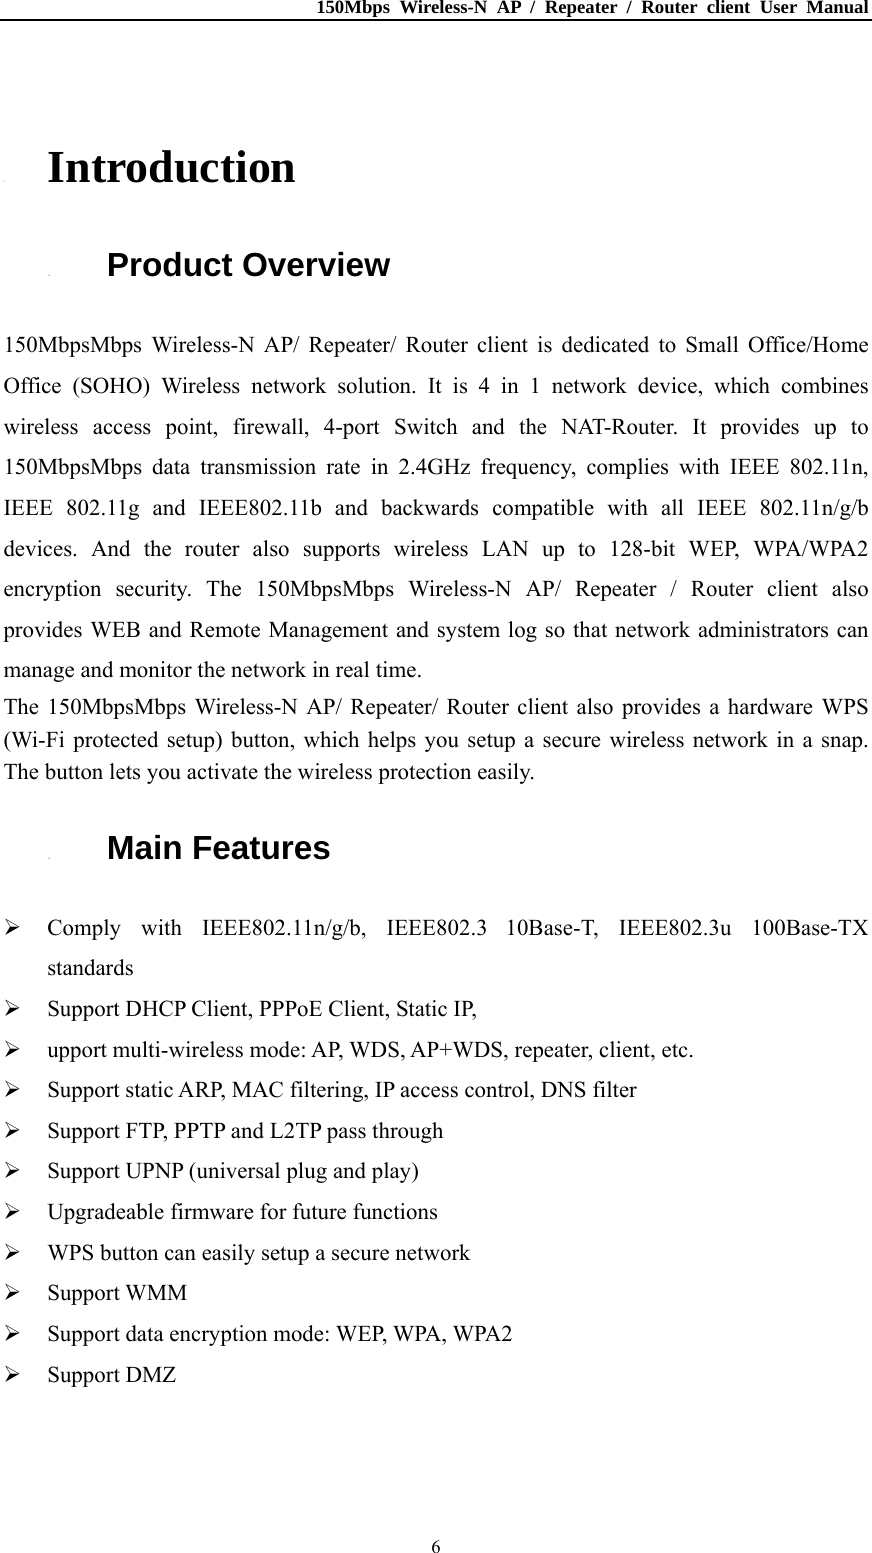 150Mbps Wireless-N AP / Repeater / Router client User Manual  6 1. Introduction 1.1. Product Overview 150MbpsMbps Wireless-N AP/ Repeater/ Router client is dedicated to Small Office/Home Office (SOHO) Wireless network solution. It is 4 in 1 network device, which combines wireless access point, firewall, 4-port Switch and the NAT-Router. It provides up to 150MbpsMbps data transmission rate in 2.4GHz frequency, complies with IEEE 802.11n, IEEE 802.11g and IEEE802.11b and backwards compatible with all IEEE 802.11n/g/b devices. And the router also supports wireless LAN up to 128-bit WEP, WPA/WPA2 encryption security. The 150MbpsMbps Wireless-N AP/ Repeater / Router client also provides WEB and Remote Management and system log so that network administrators can manage and monitor the network in real time. The 150MbpsMbps Wireless-N AP/ Repeater/ Router client also provides a hardware WPS (Wi-Fi protected setup) button, which helps you setup a secure wireless network in a snap. The button lets you activate the wireless protection easily. 1.2. Main Features  Comply with IEEE802.11n/g/b, IEEE802.3 10Base-T, IEEE802.3u 100Base-TX standards  Support DHCP Client, PPPoE Client, Static IP,  upport multi-wireless mode: AP, WDS, AP+WDS, repeater, client, etc.  Support static ARP, MAC filtering, IP access control, DNS filter  Support FTP, PPTP and L2TP pass through  Support UPNP (universal plug and play)  Upgradeable firmware for future functions  WPS button can easily setup a secure network  Support WMM  Support data encryption mode: WEP, WPA, WPA2  Support DMZ 